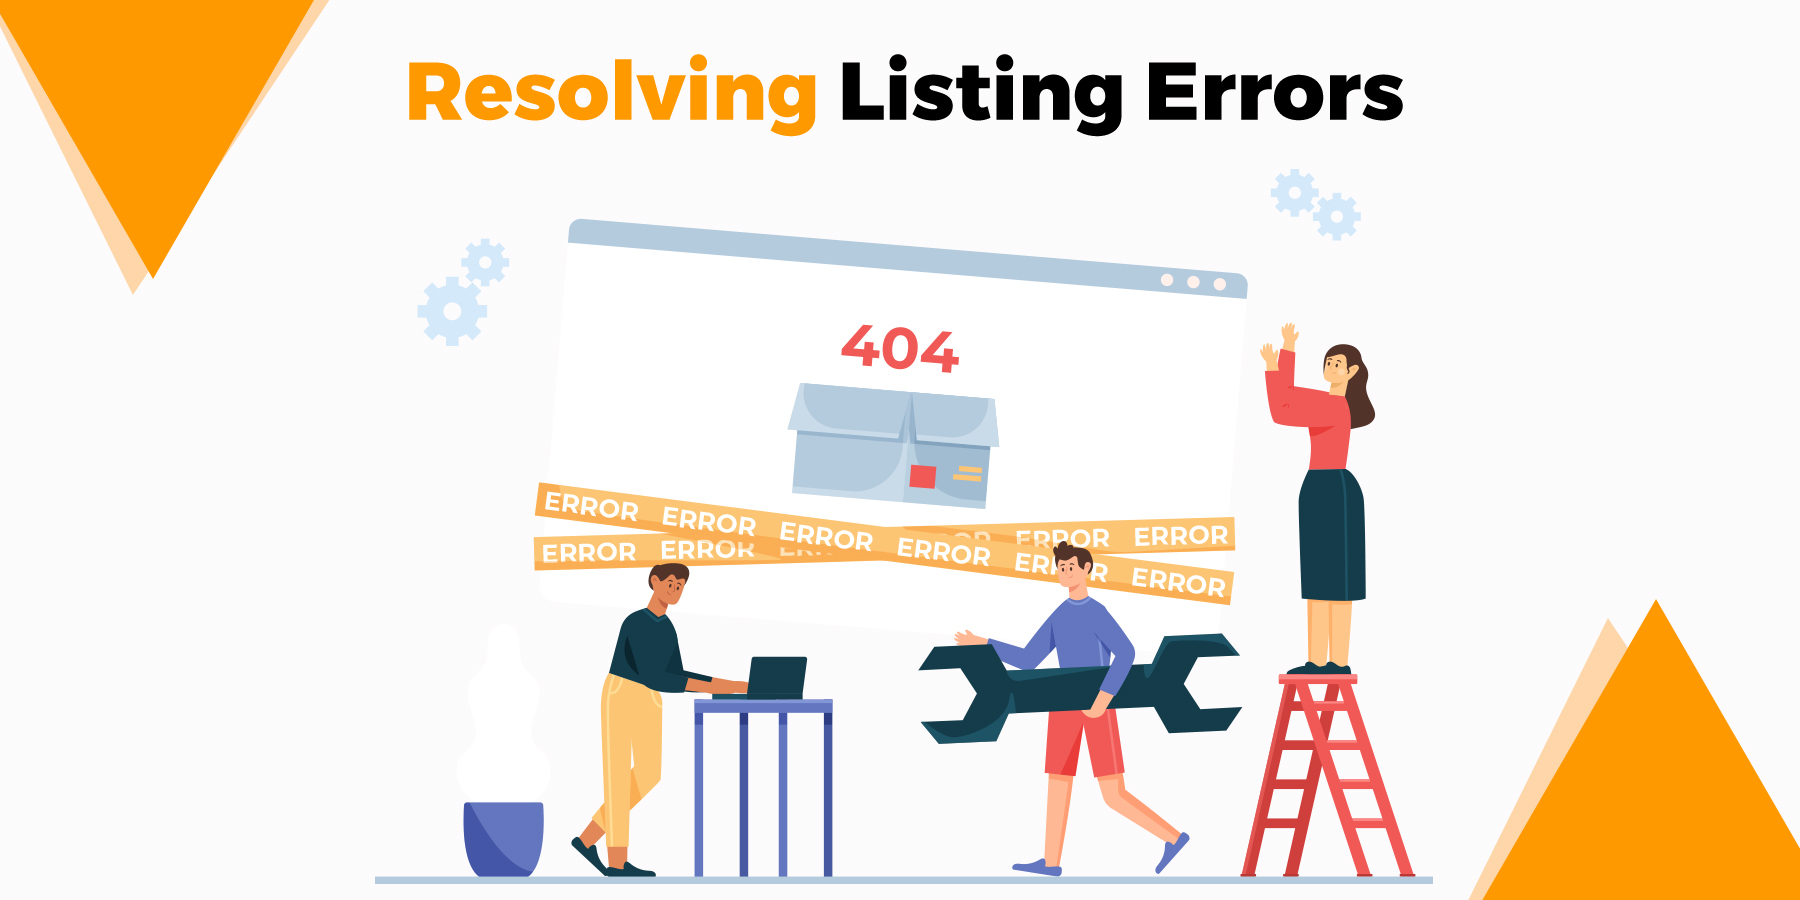 Common Amazon Listing Errors And How To Resolve The